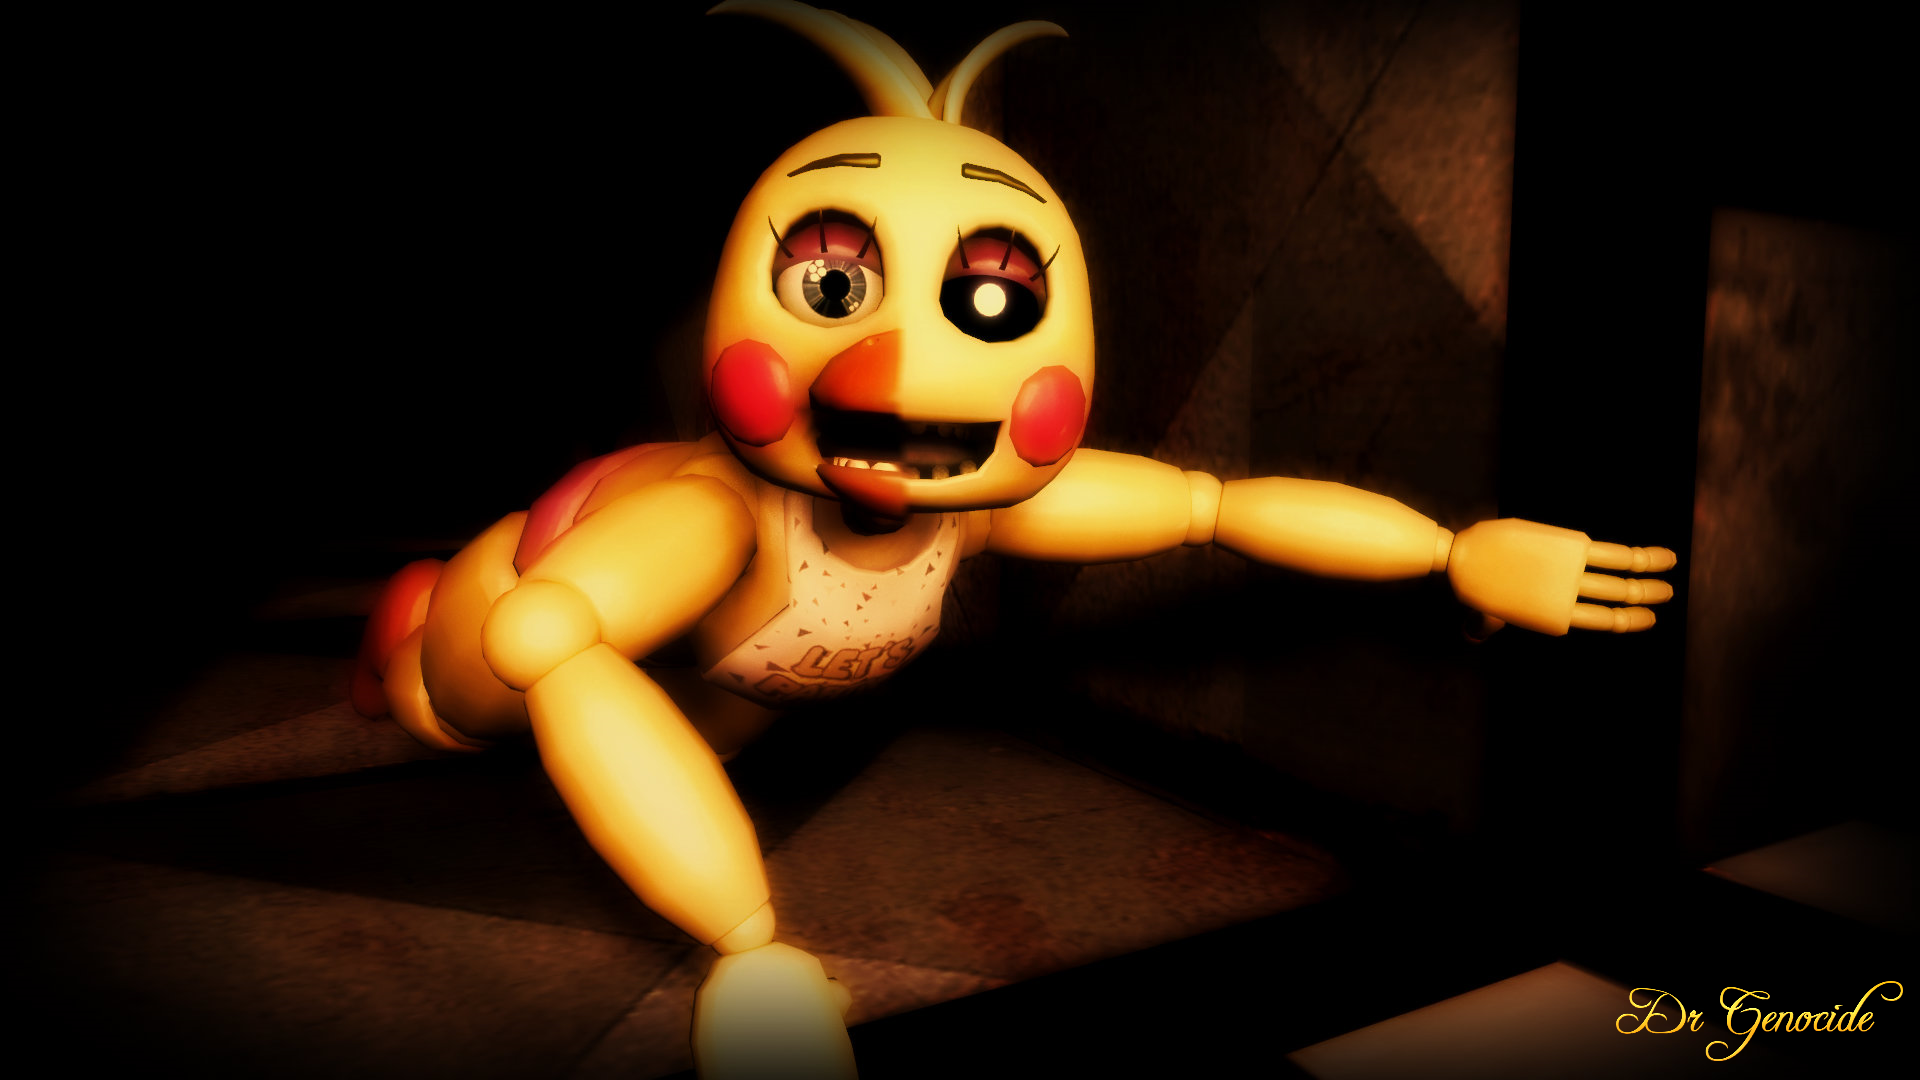 Fnaf 2 Withered Chica Fanart